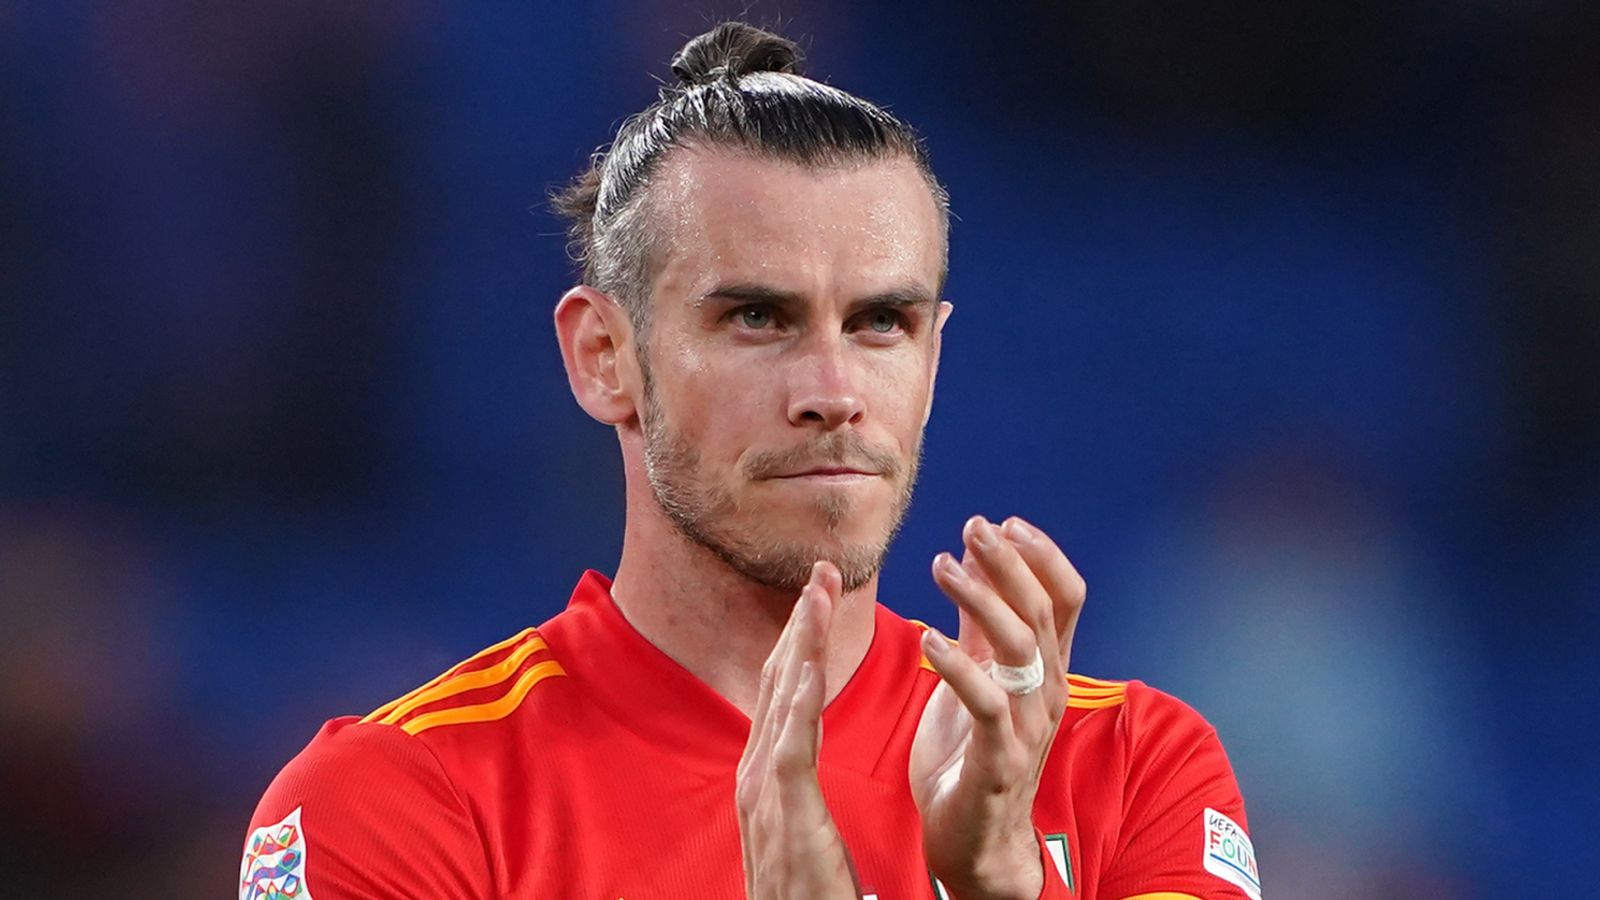 Gareth Bale: Wales need to learn dark arts ahead of World Cup after conceding late vs Netherlands